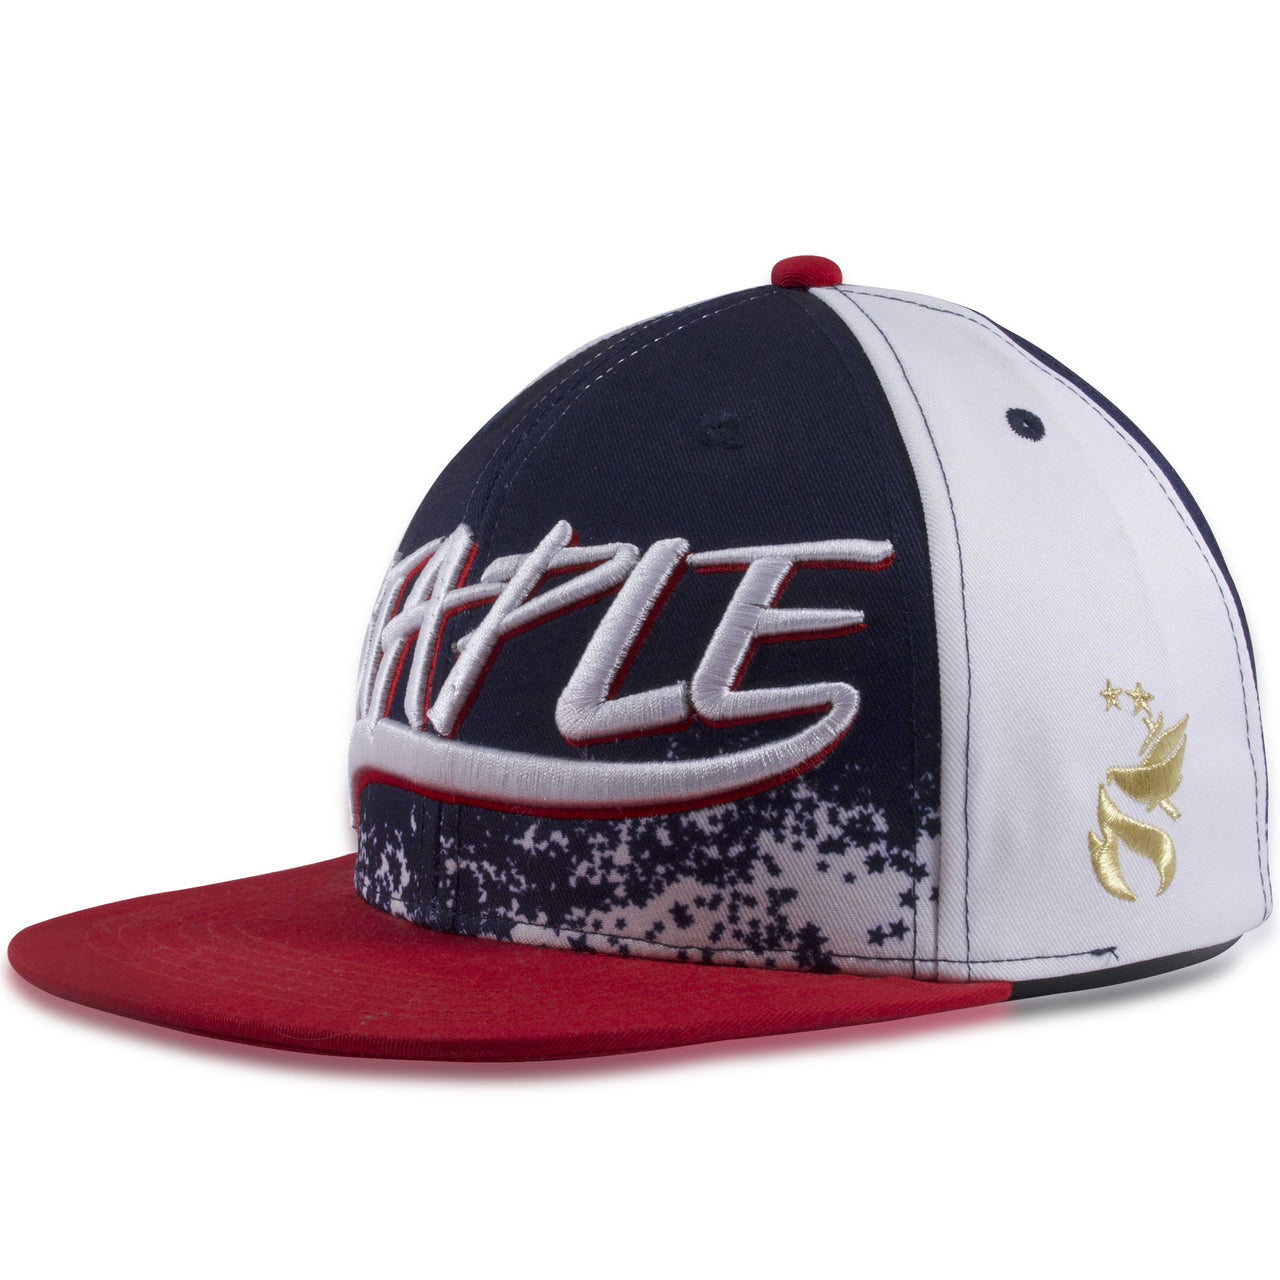 Staple Team USA Olympic Red, White, Blue Snapback Hat